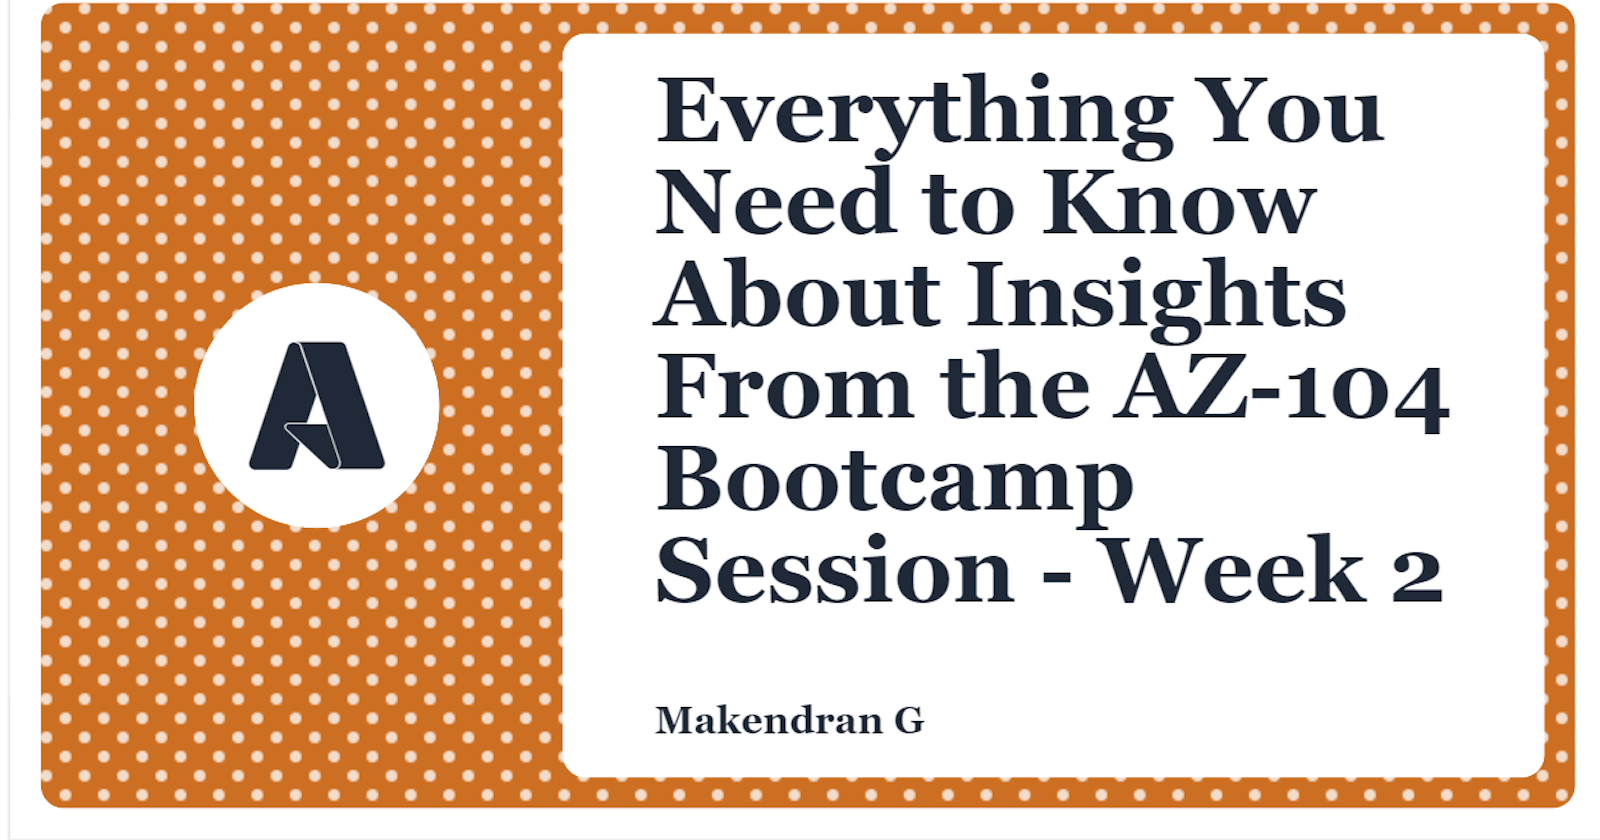 Everything You Need to Know About Insights From the AZ-104 Bootcamp Session - Week 2